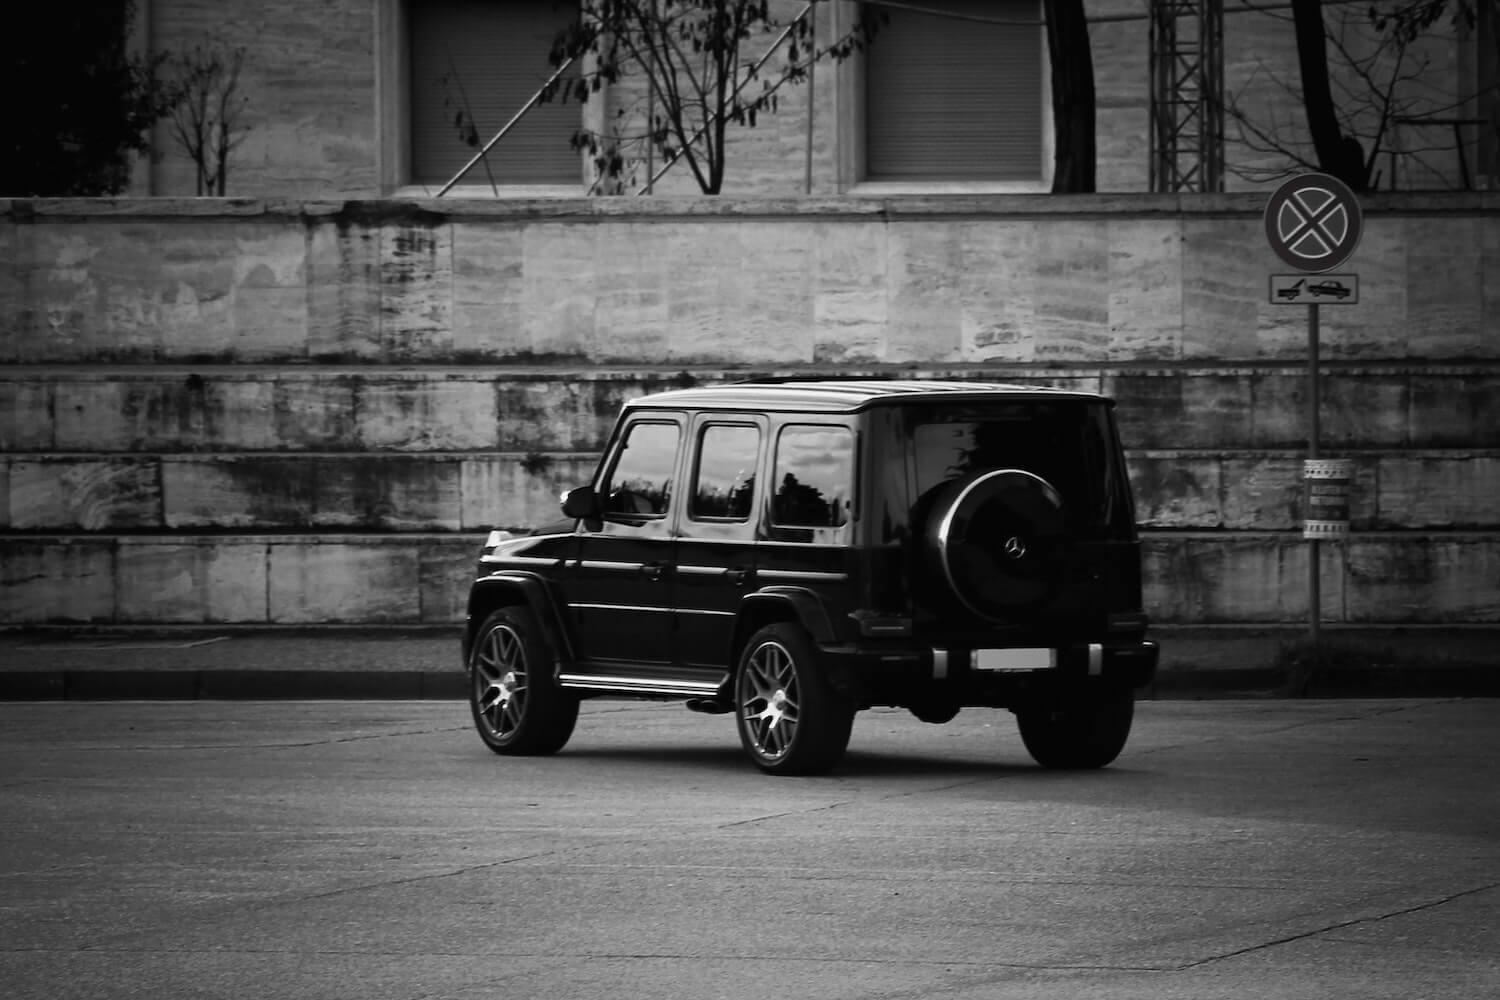 Black and white photo of a Mercedes Wagon G-Class SUV parked facing the camera, a brick wall visible in the background.